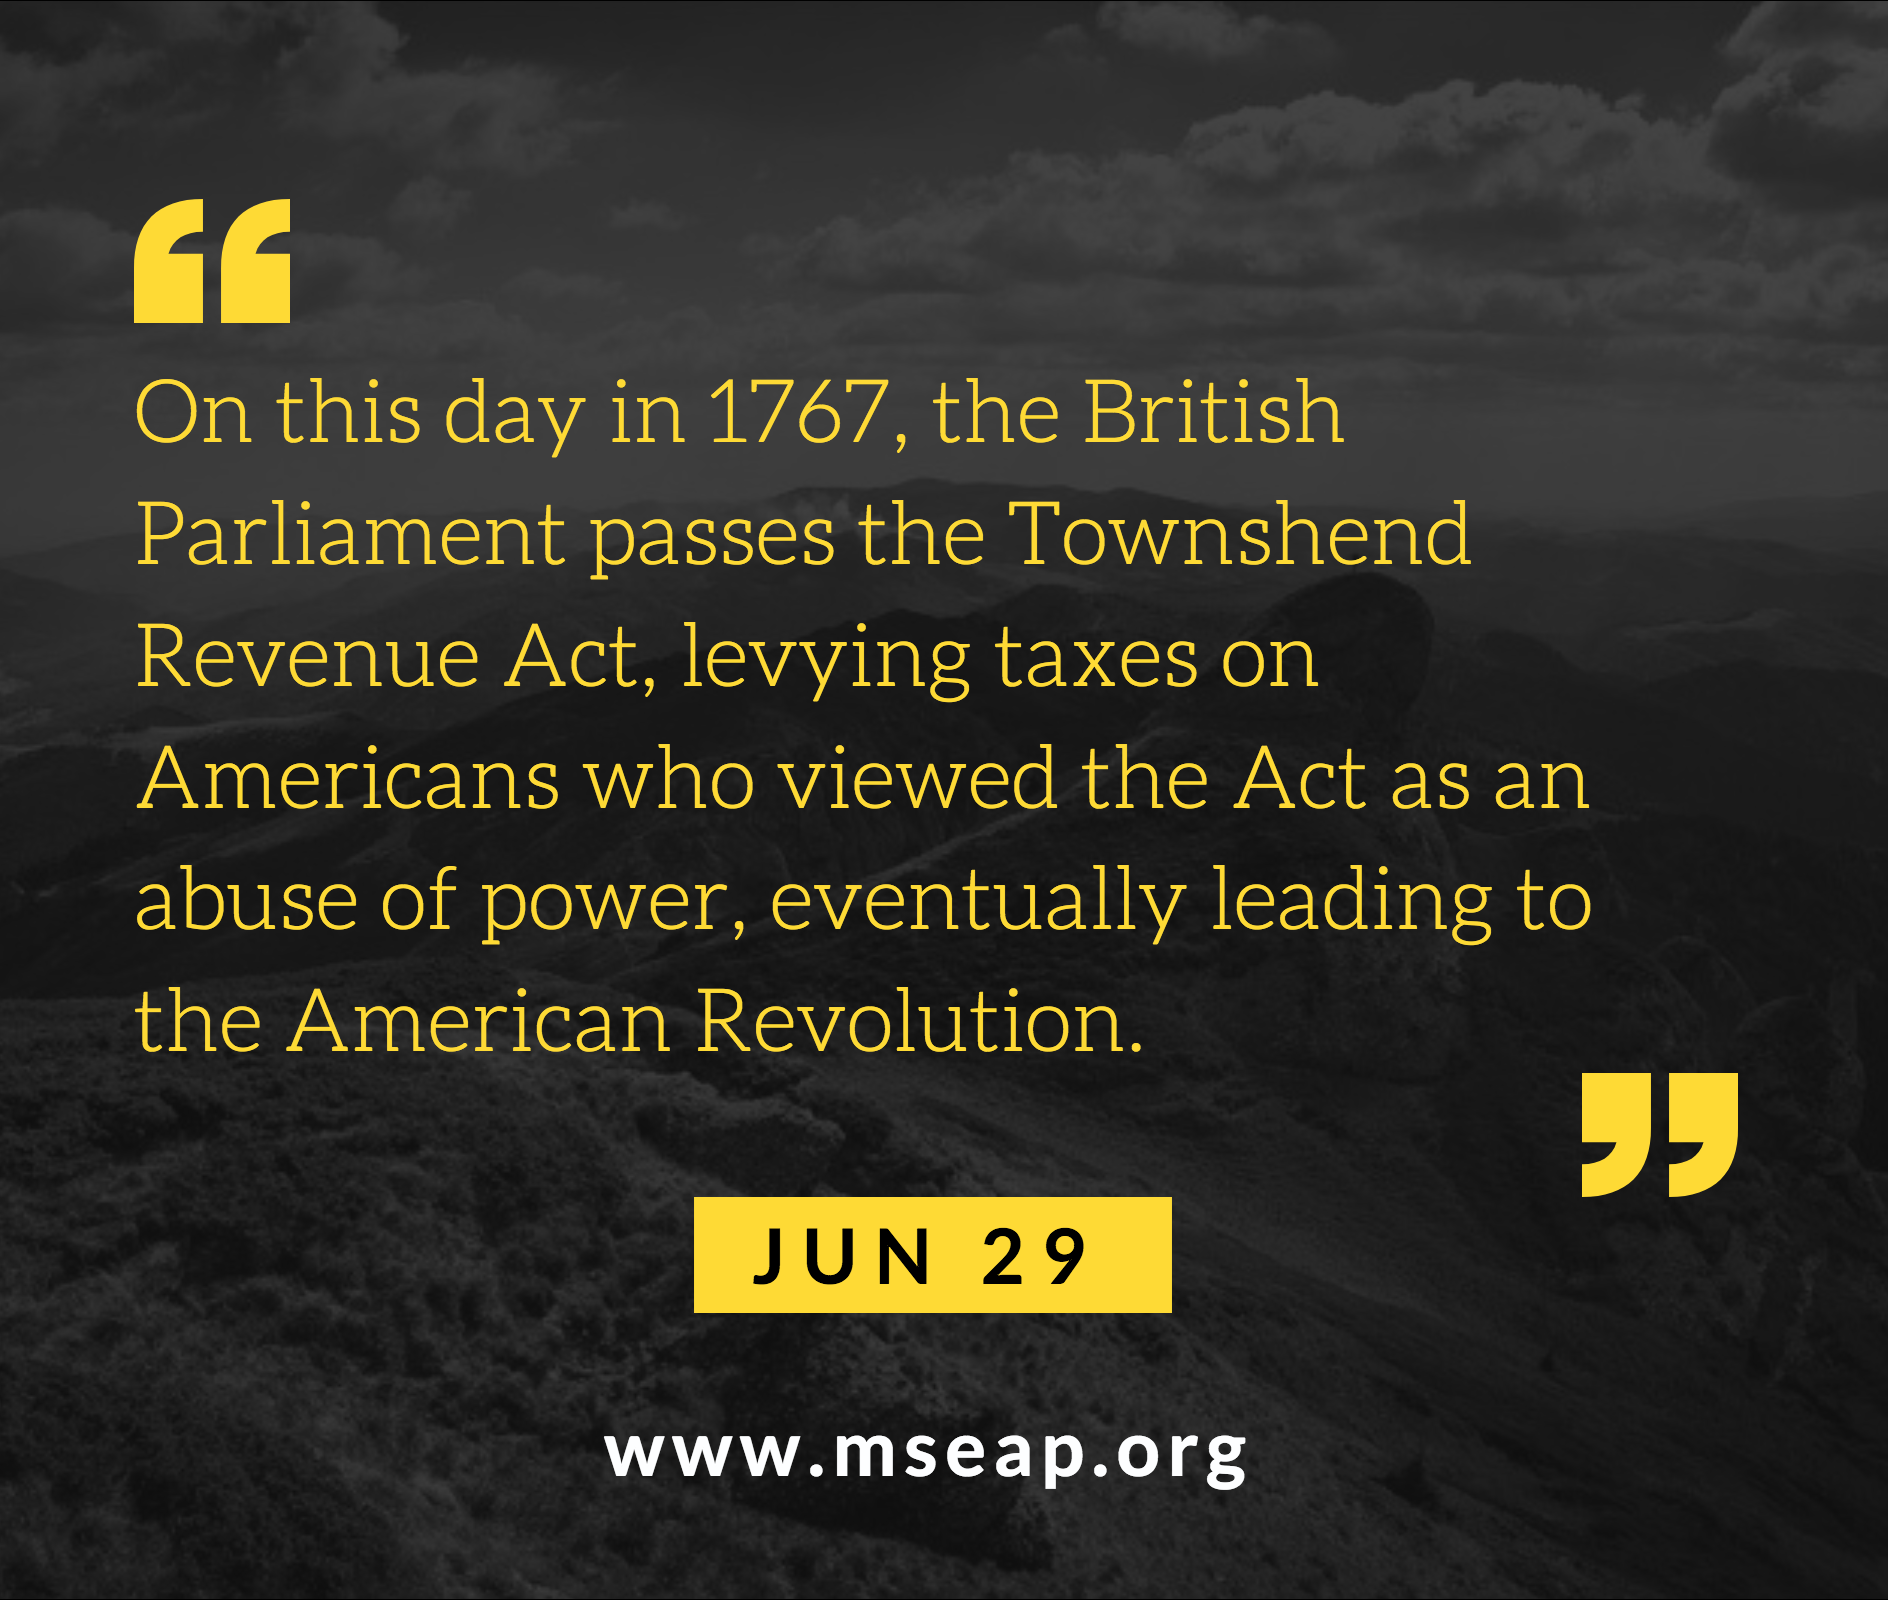 [Today in history] June 29